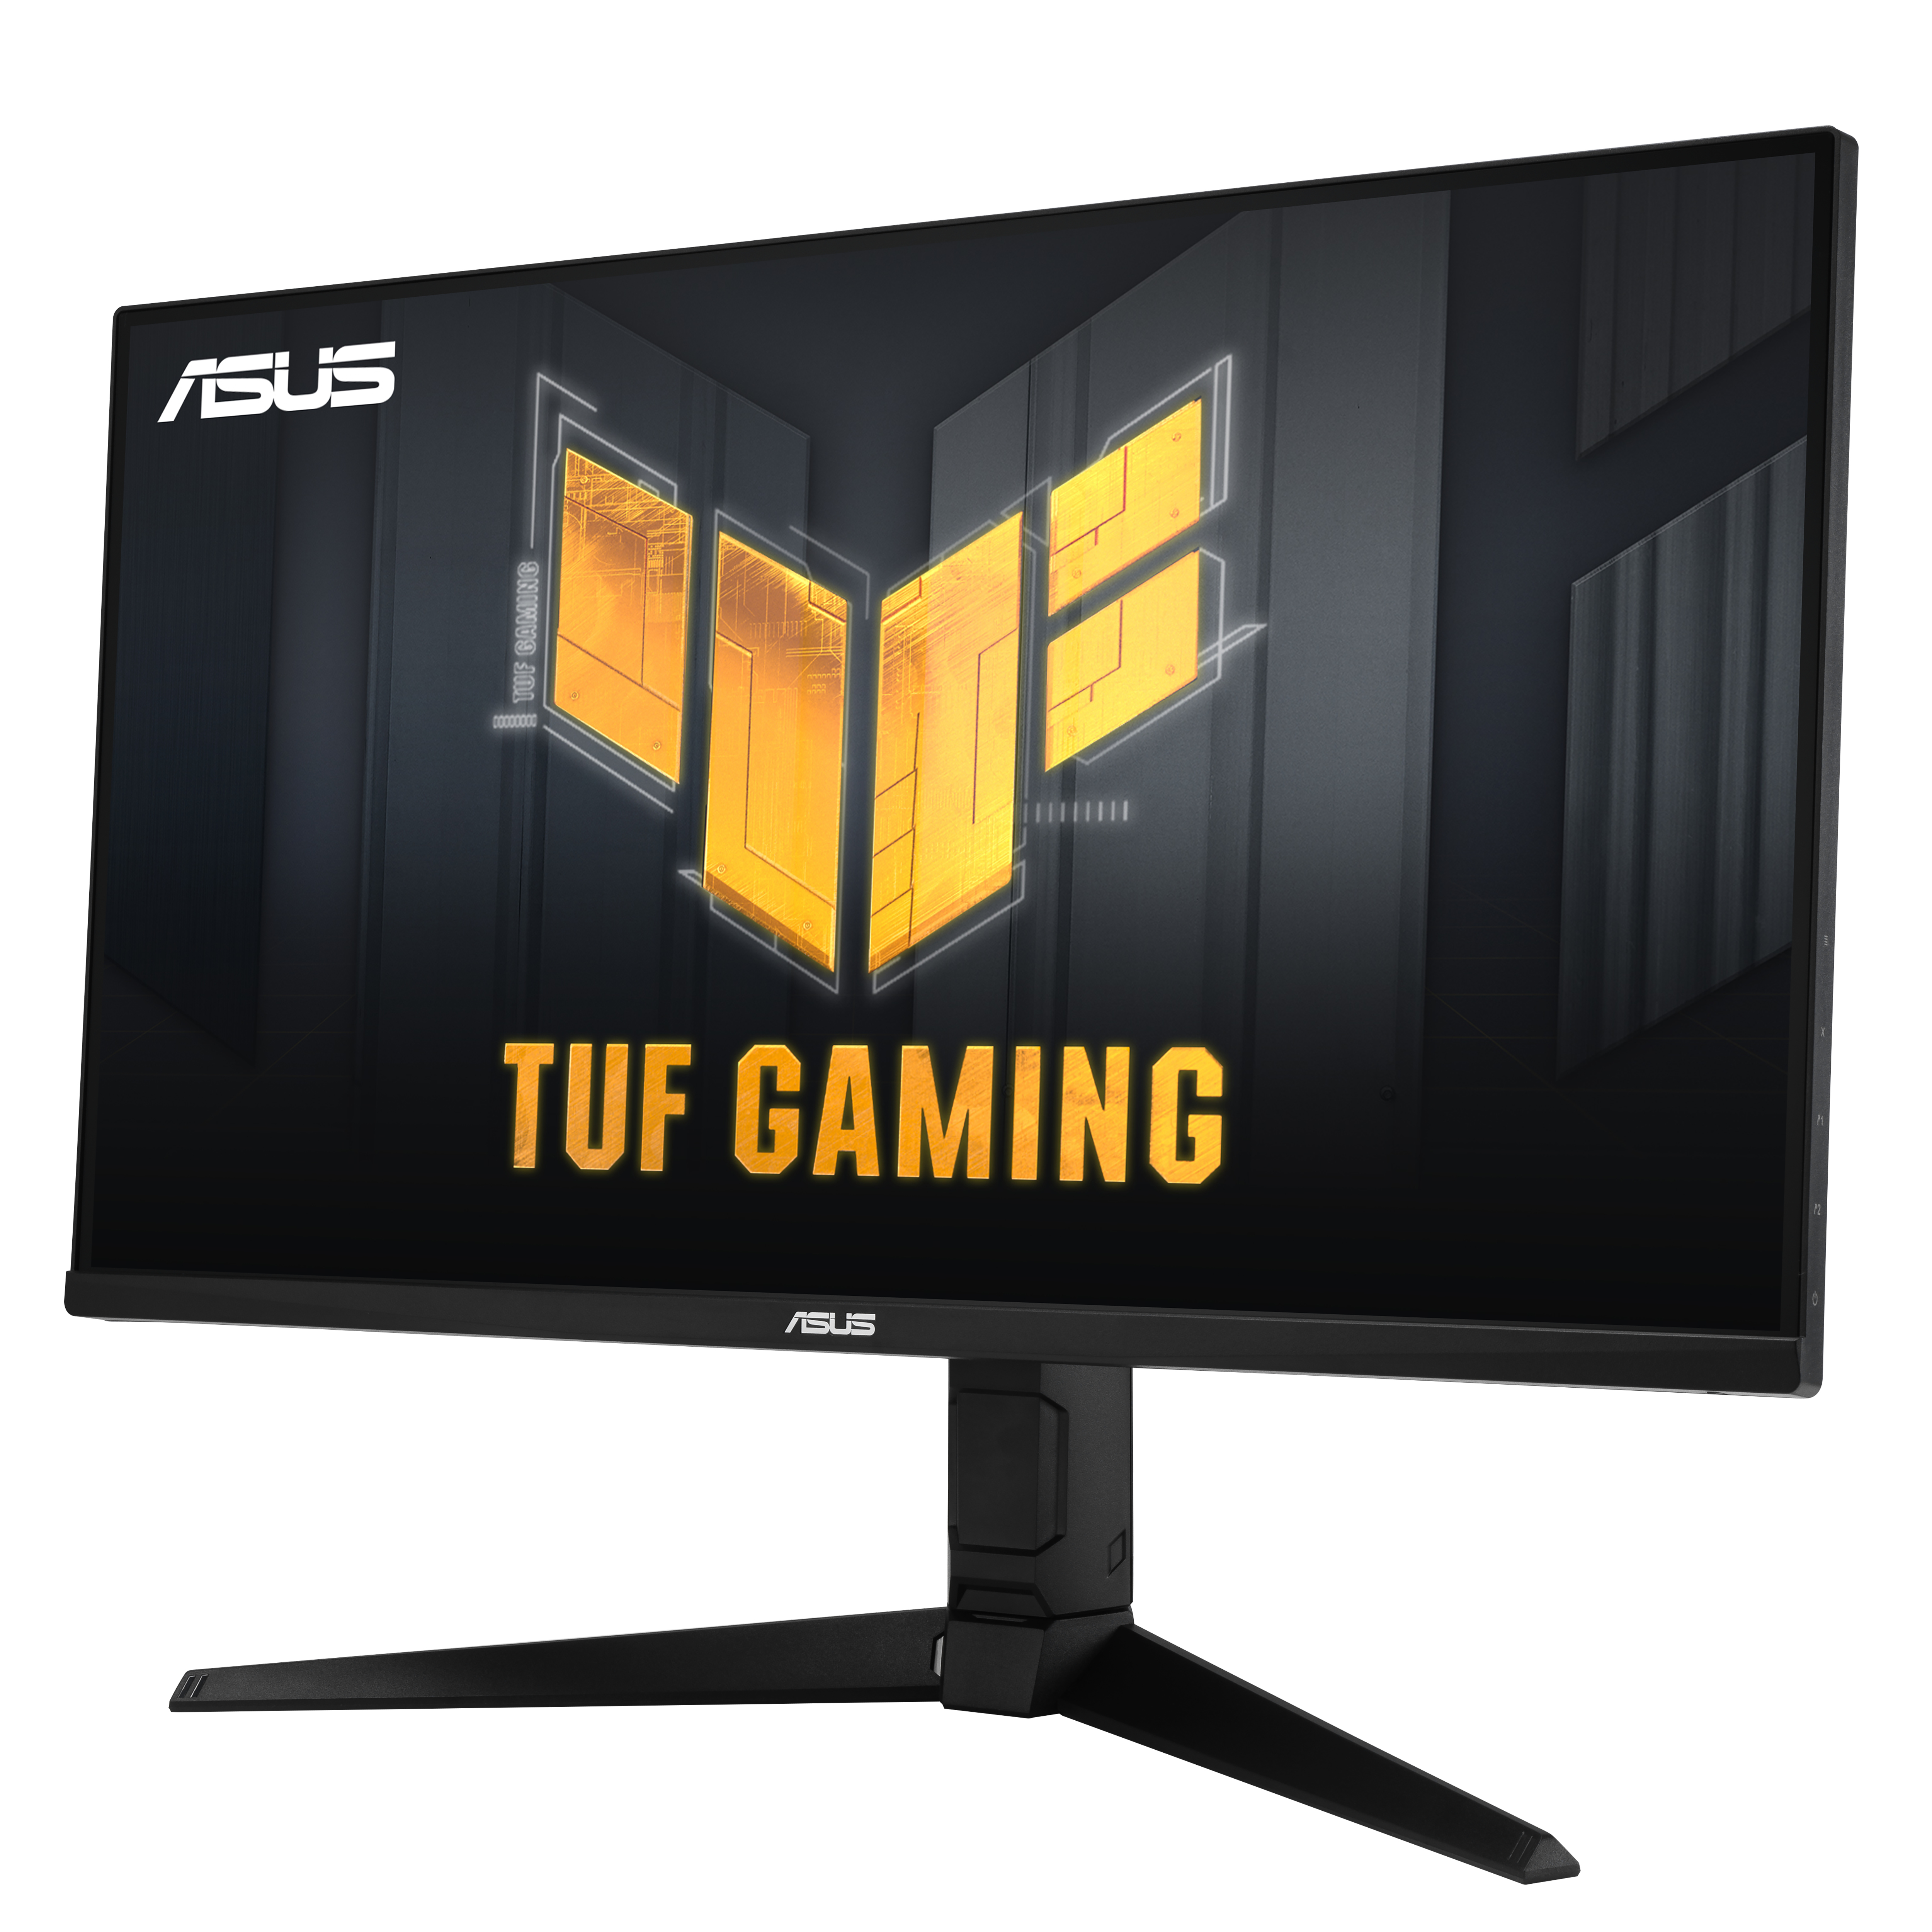 ASUS TUF 144 VG28UQL1A ms Hz) 4K Gaming 28 (1 Gaming Monitor Reaktionszeit, Zoll UHD